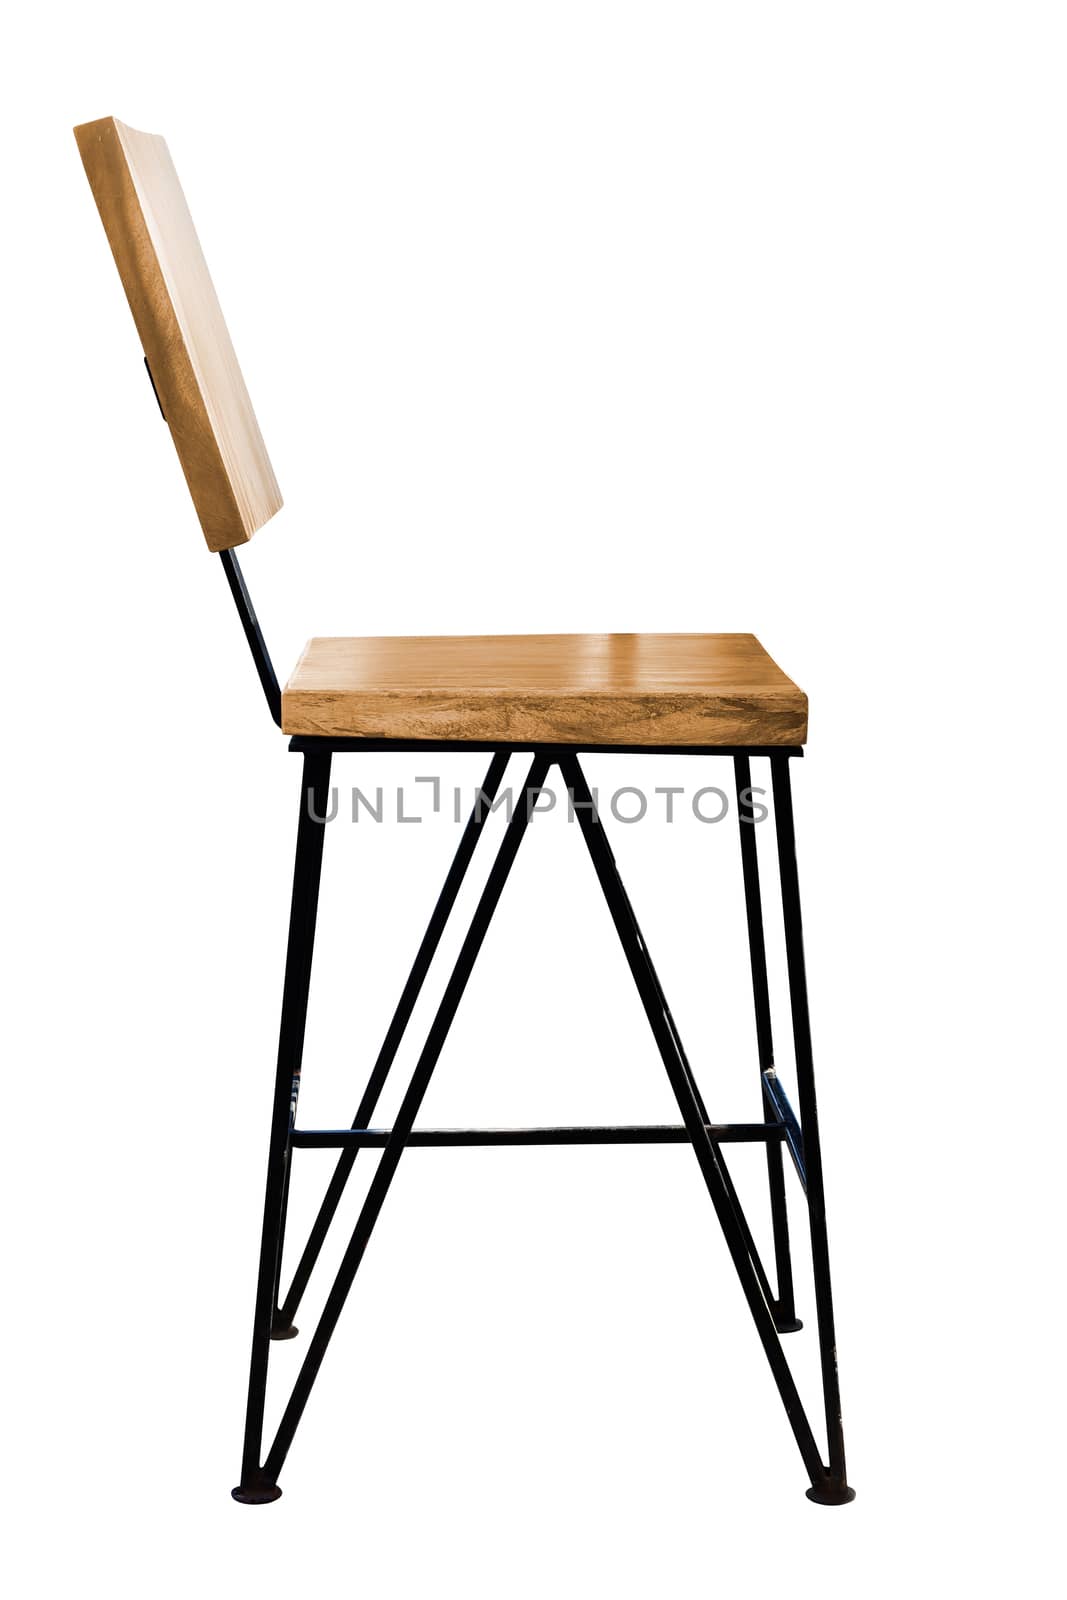 Modern wooden chair steel legs isolated on white background, work with clipping path.